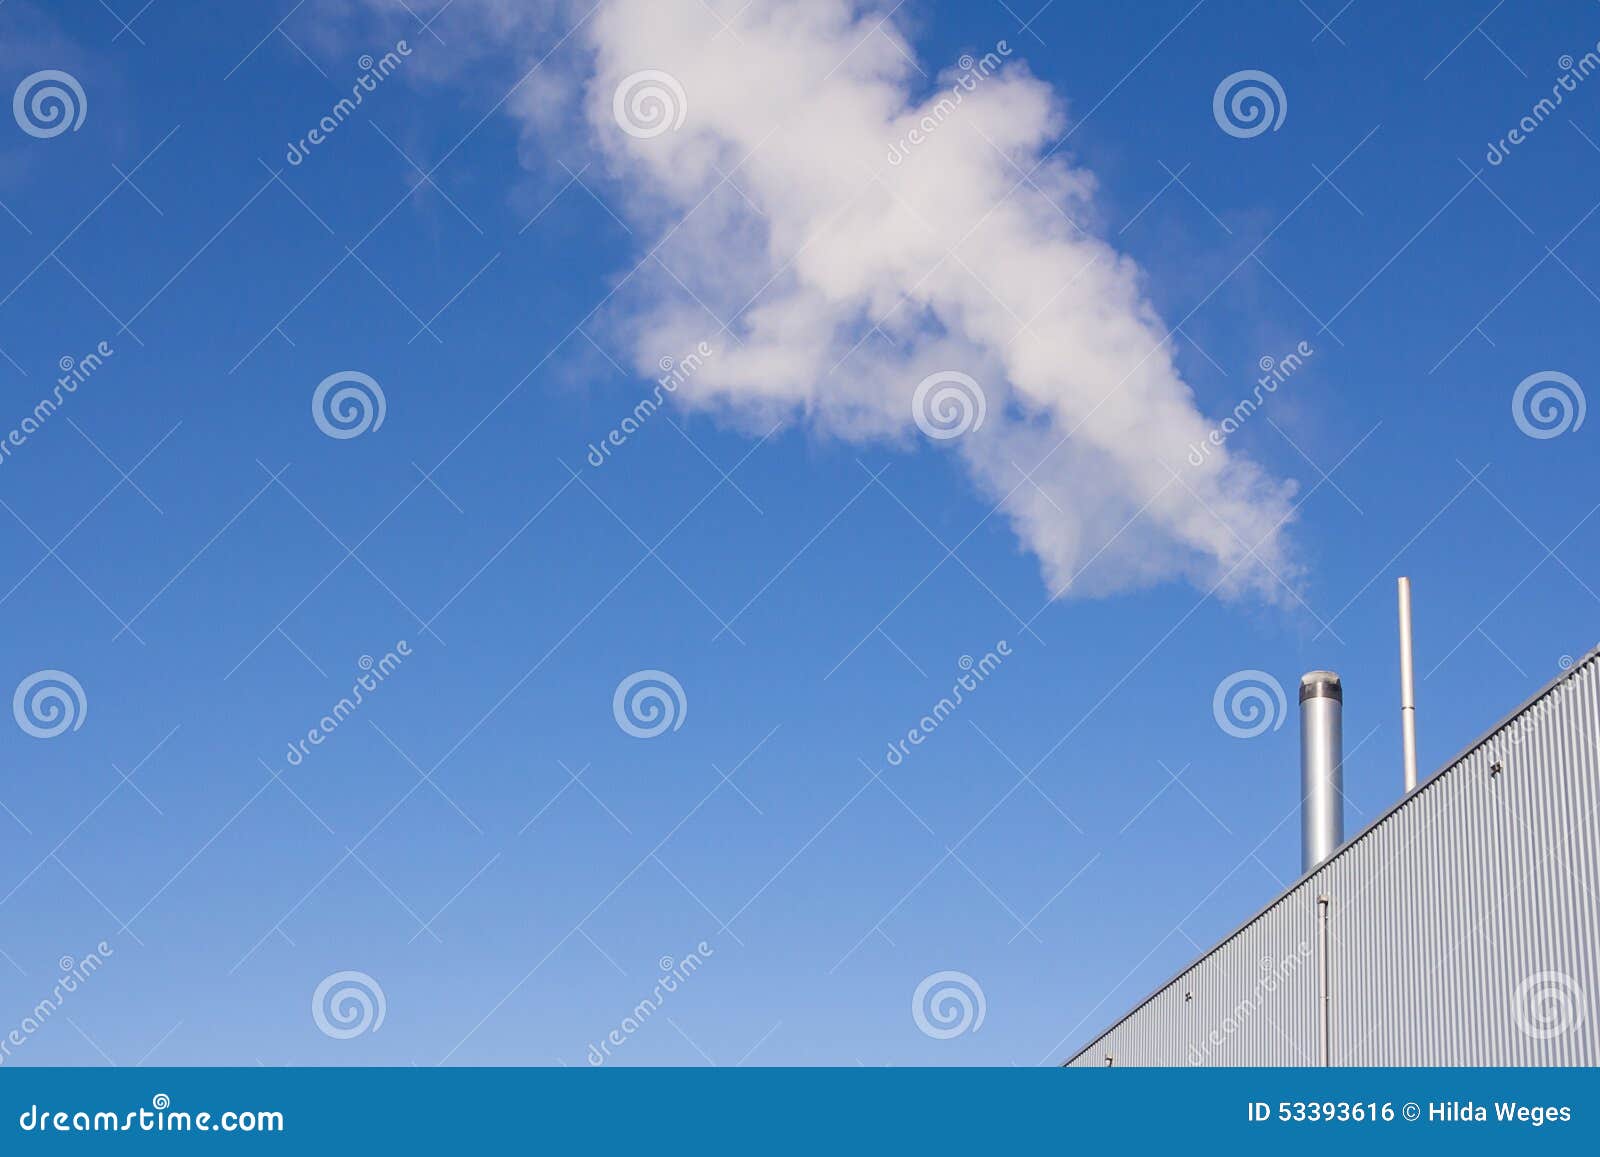 water vapor or steam from a factory